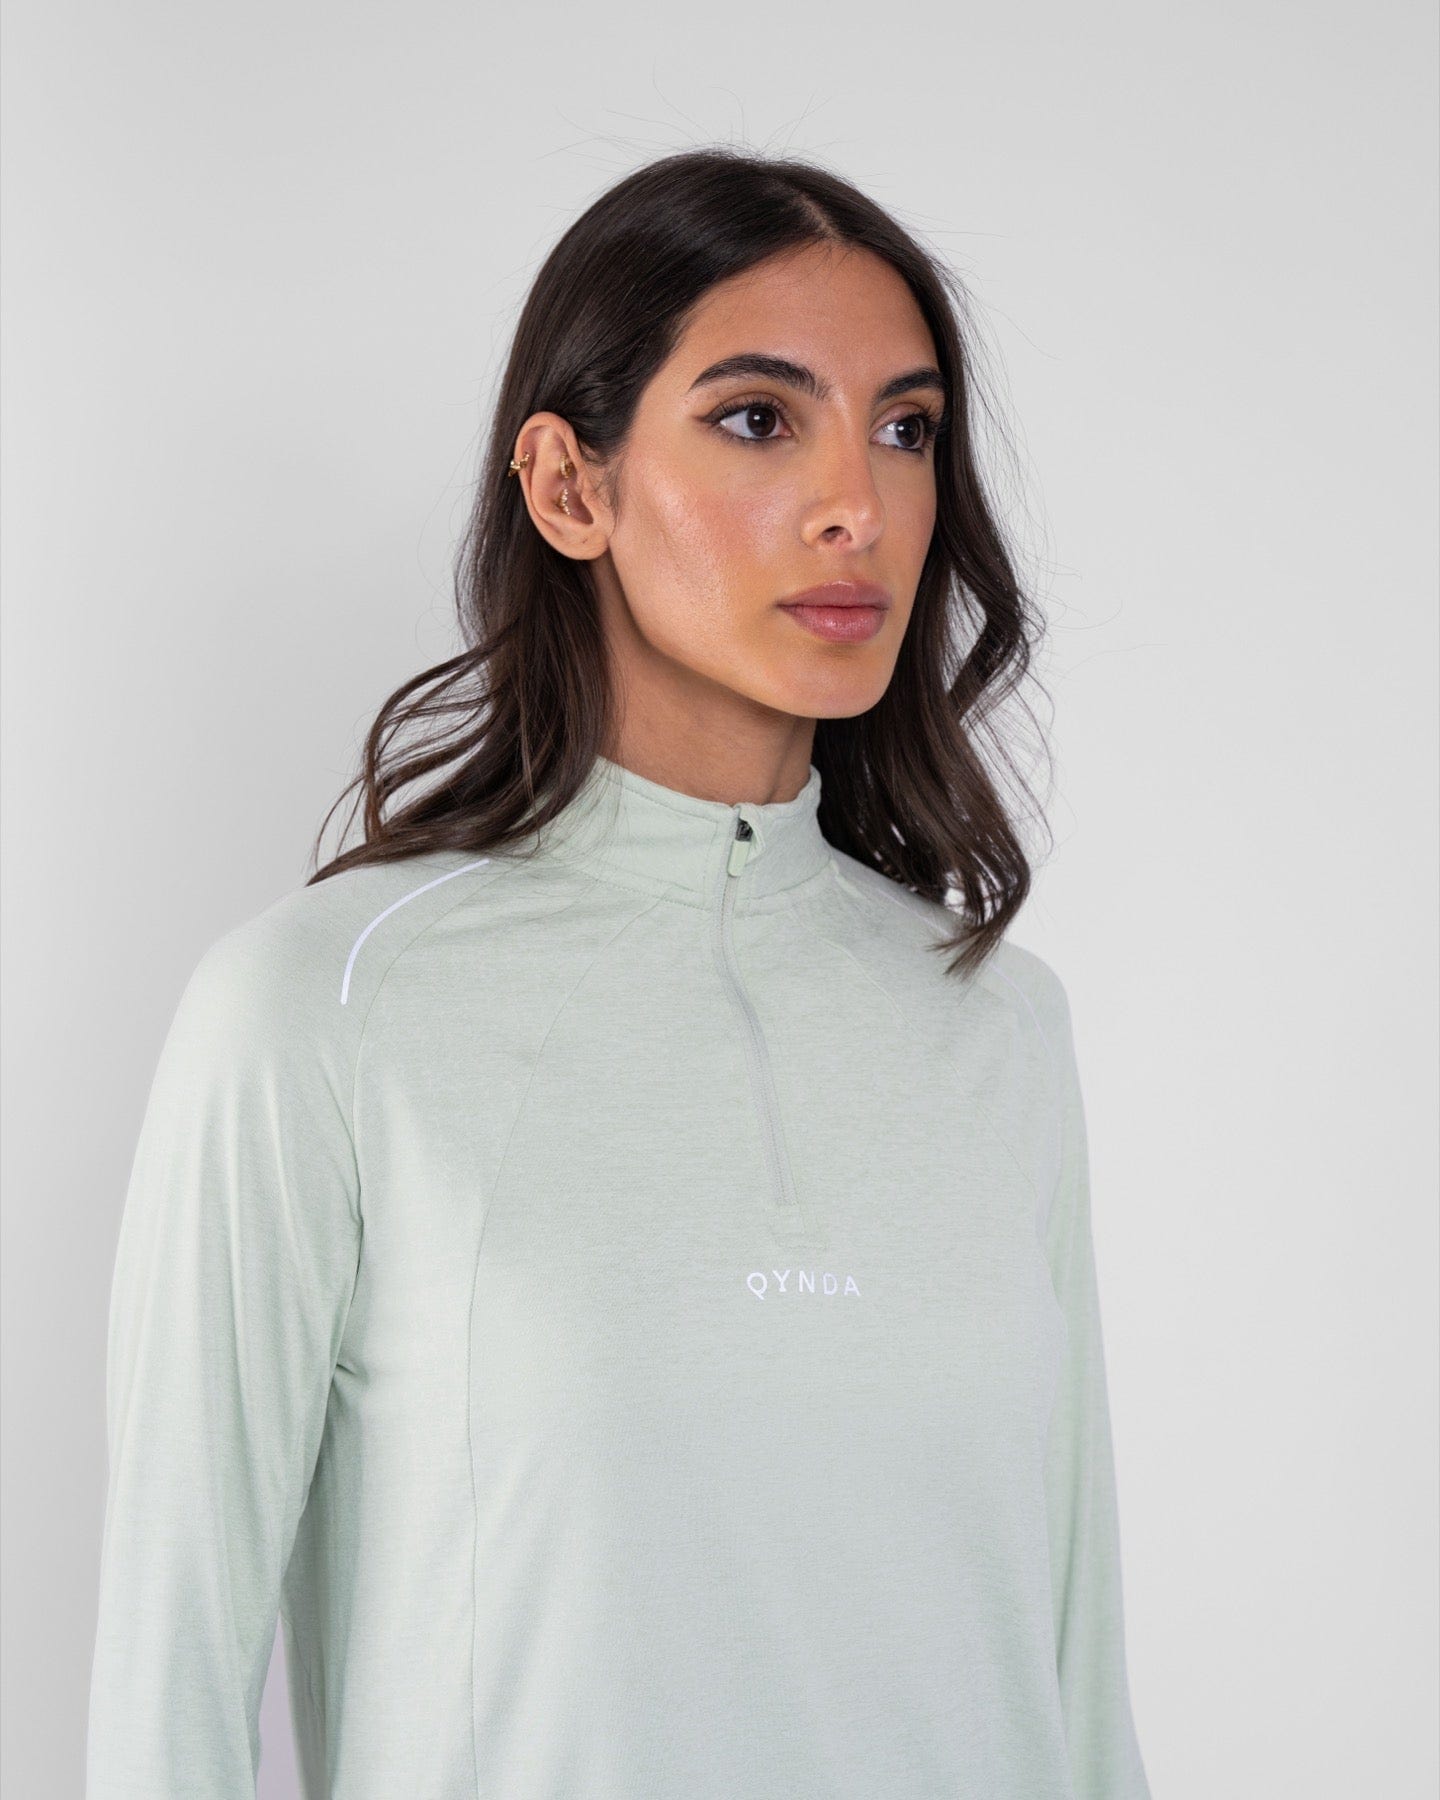 A model with medium-length brown hair wearing a high neck long sleeve shirt ARMA by Qynda featuring moisture-resistant technology, slightly turned to her left, against a light gray background.